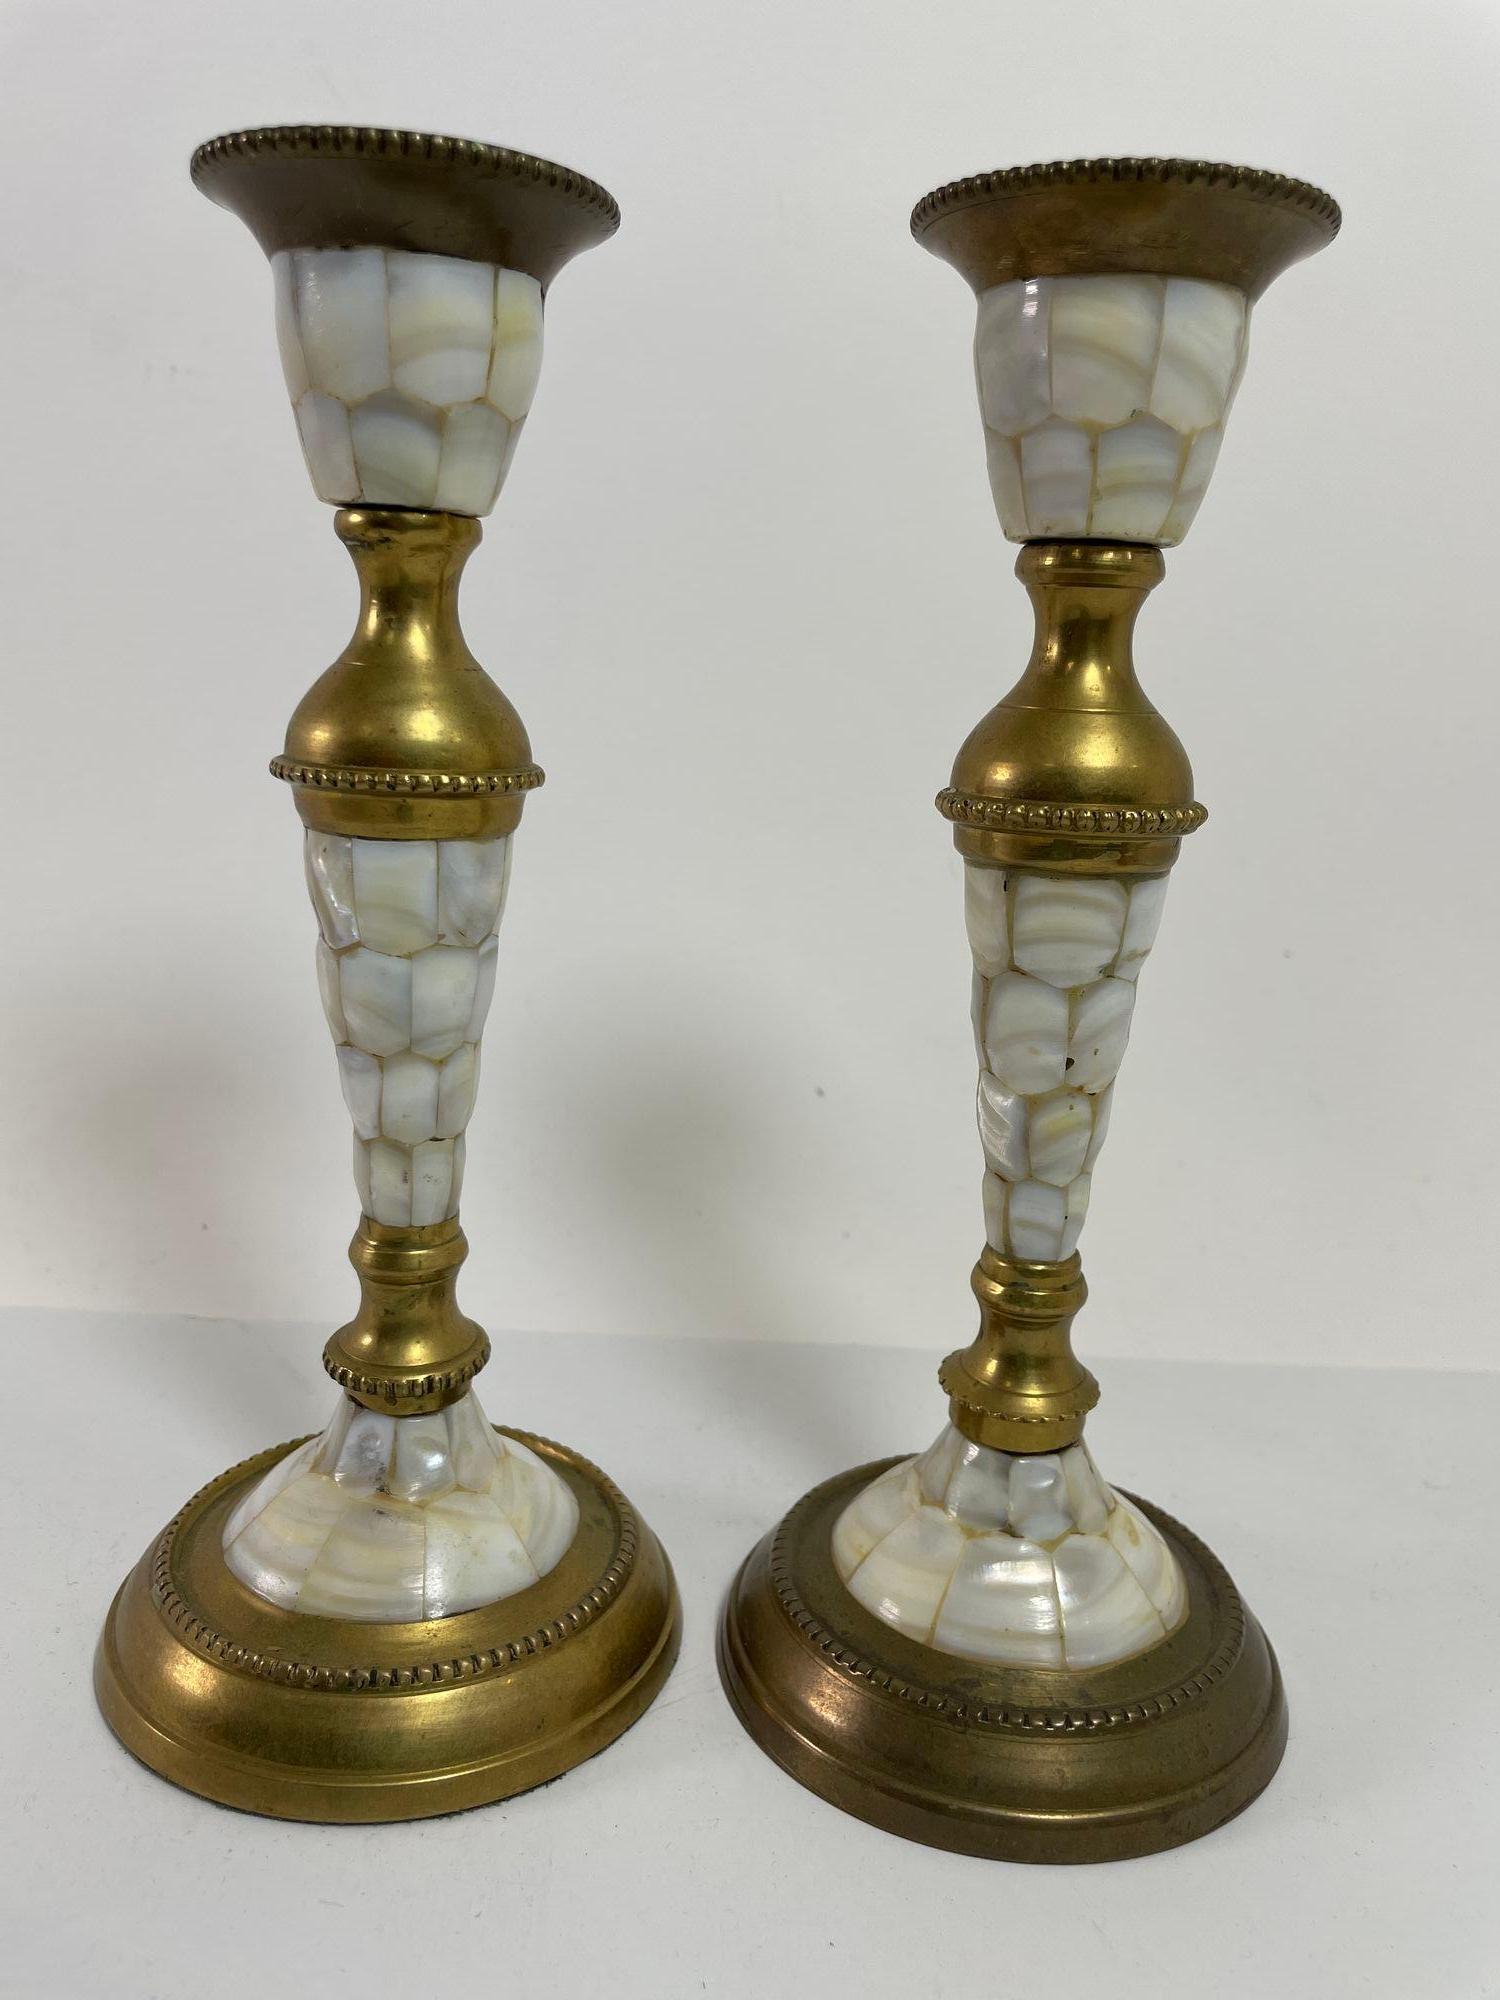 Vintage Brass and Mother Of Pearl Candlesticks.
A pair of vintage brass and mother of pearl candle holder.
These 8.25″ tall candlesticks are adorned with three sections of beautifully inlaid mother of pearl.
There is a beaded design on the brass